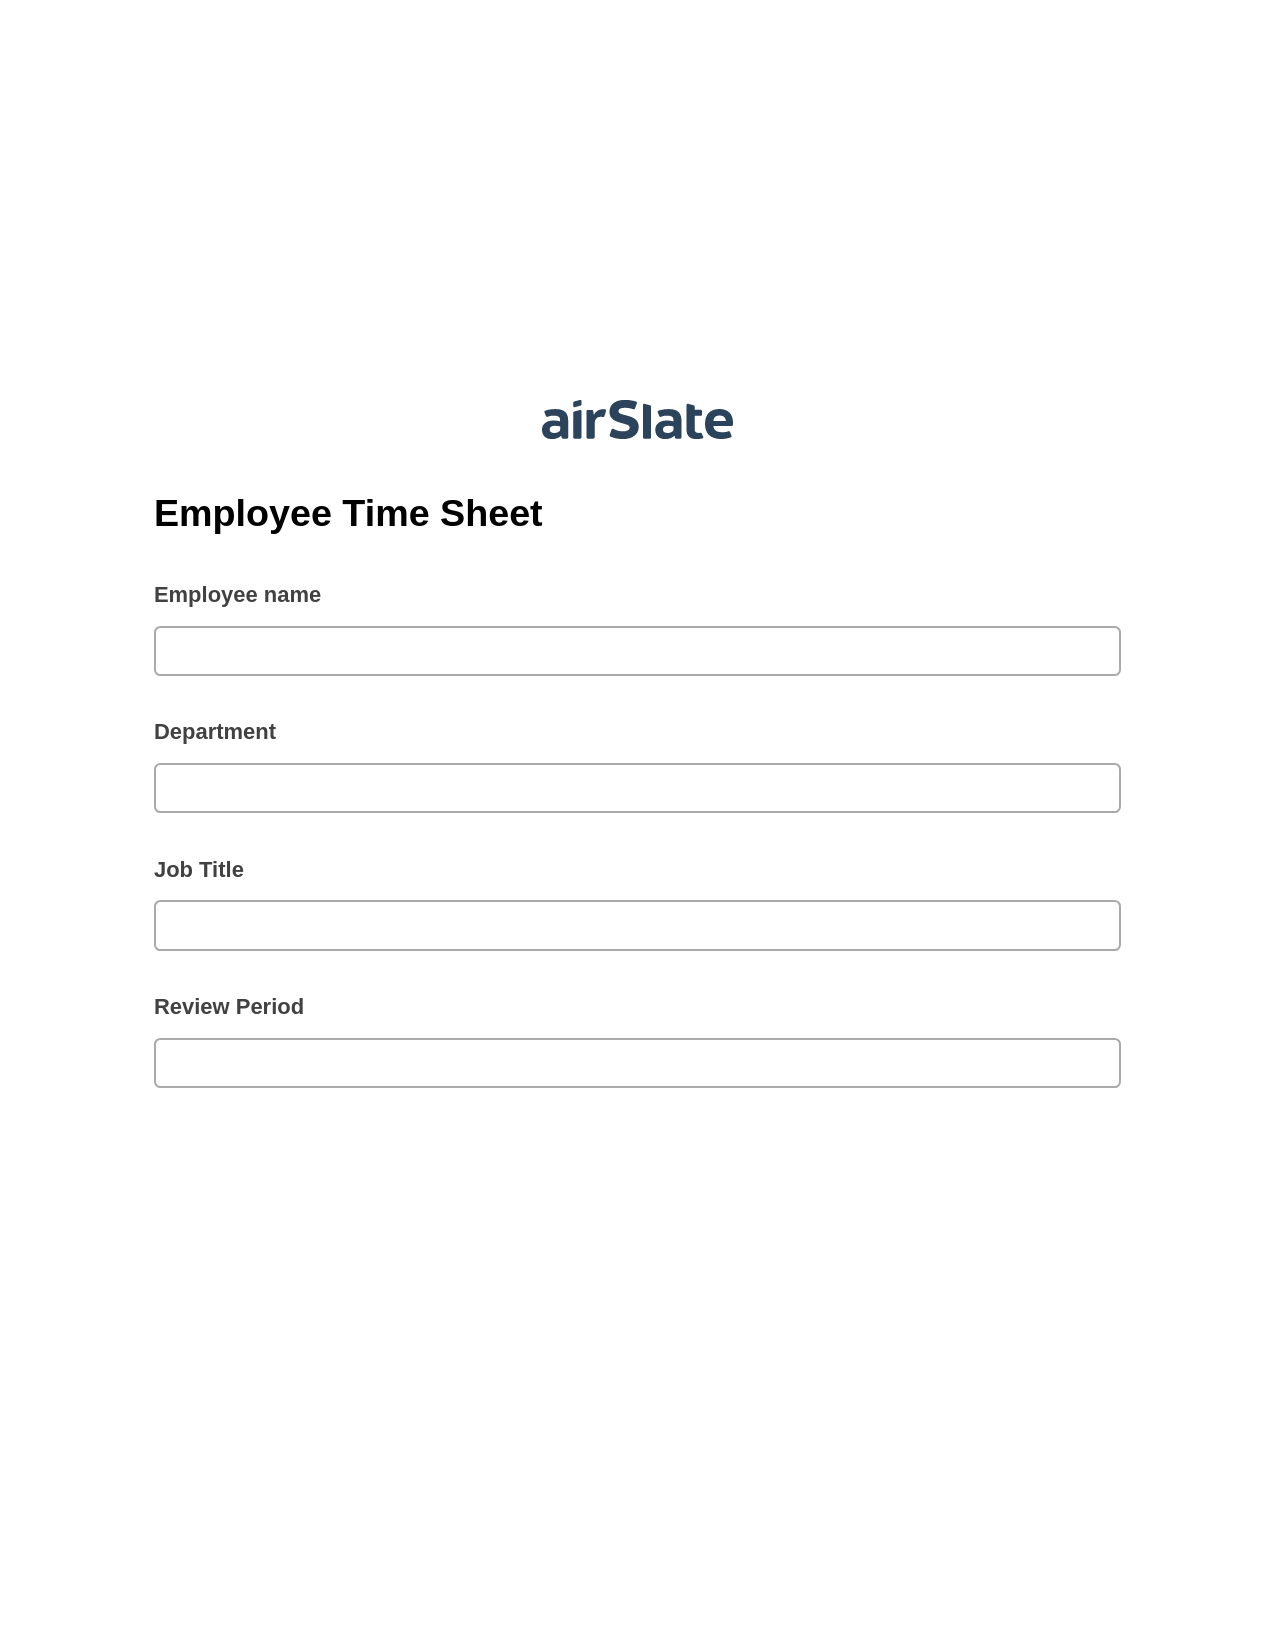 Multirole Employee Time Sheet Pre-fill from Google Sheets Bot, Create Salesforce Records Bot, Archive to SharePoint Folder Bot